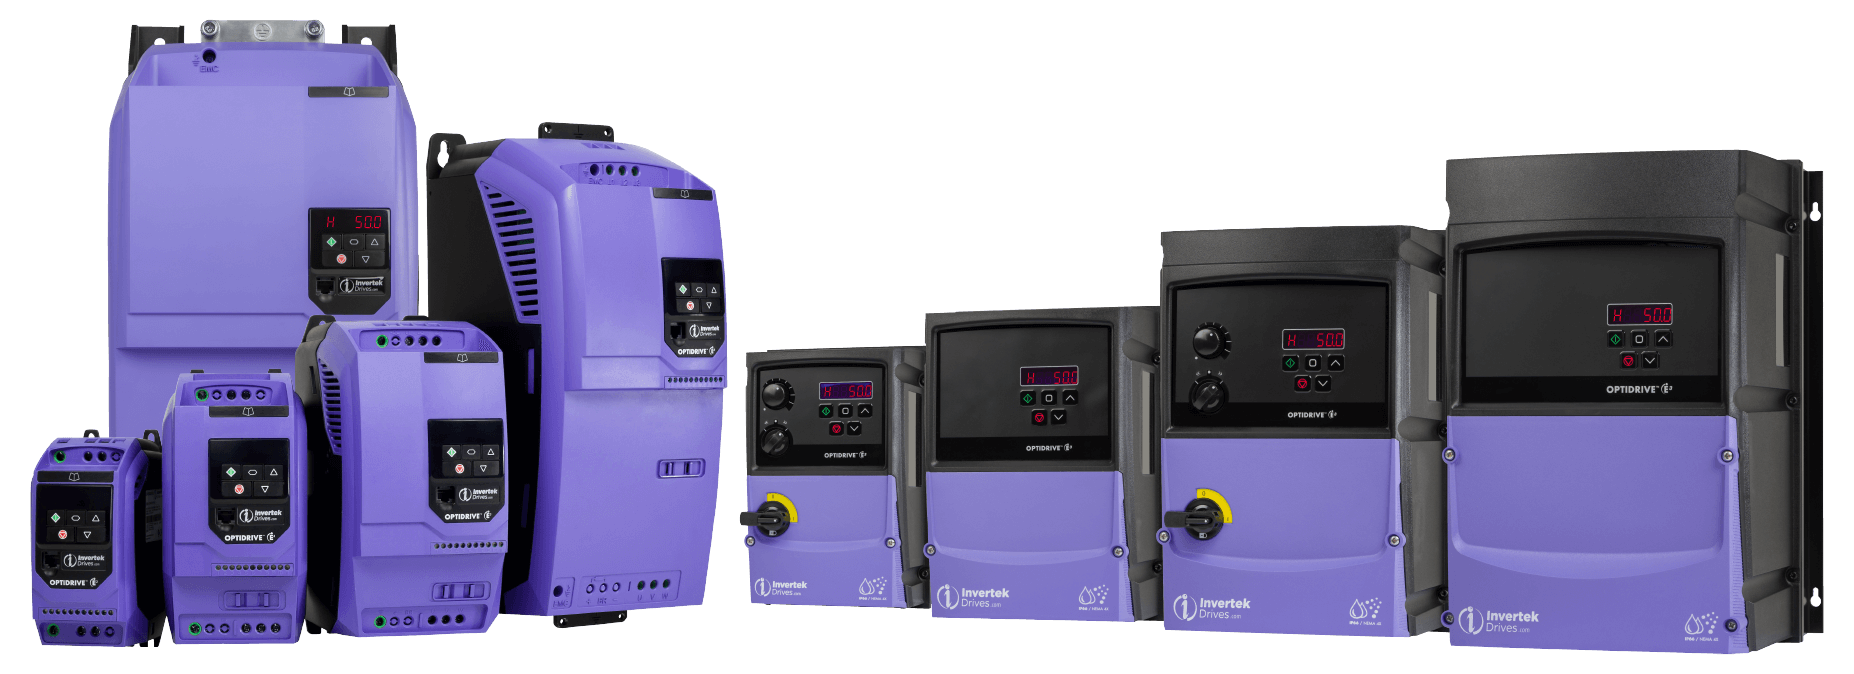 Optidrive E3 Variable Frequency Drives